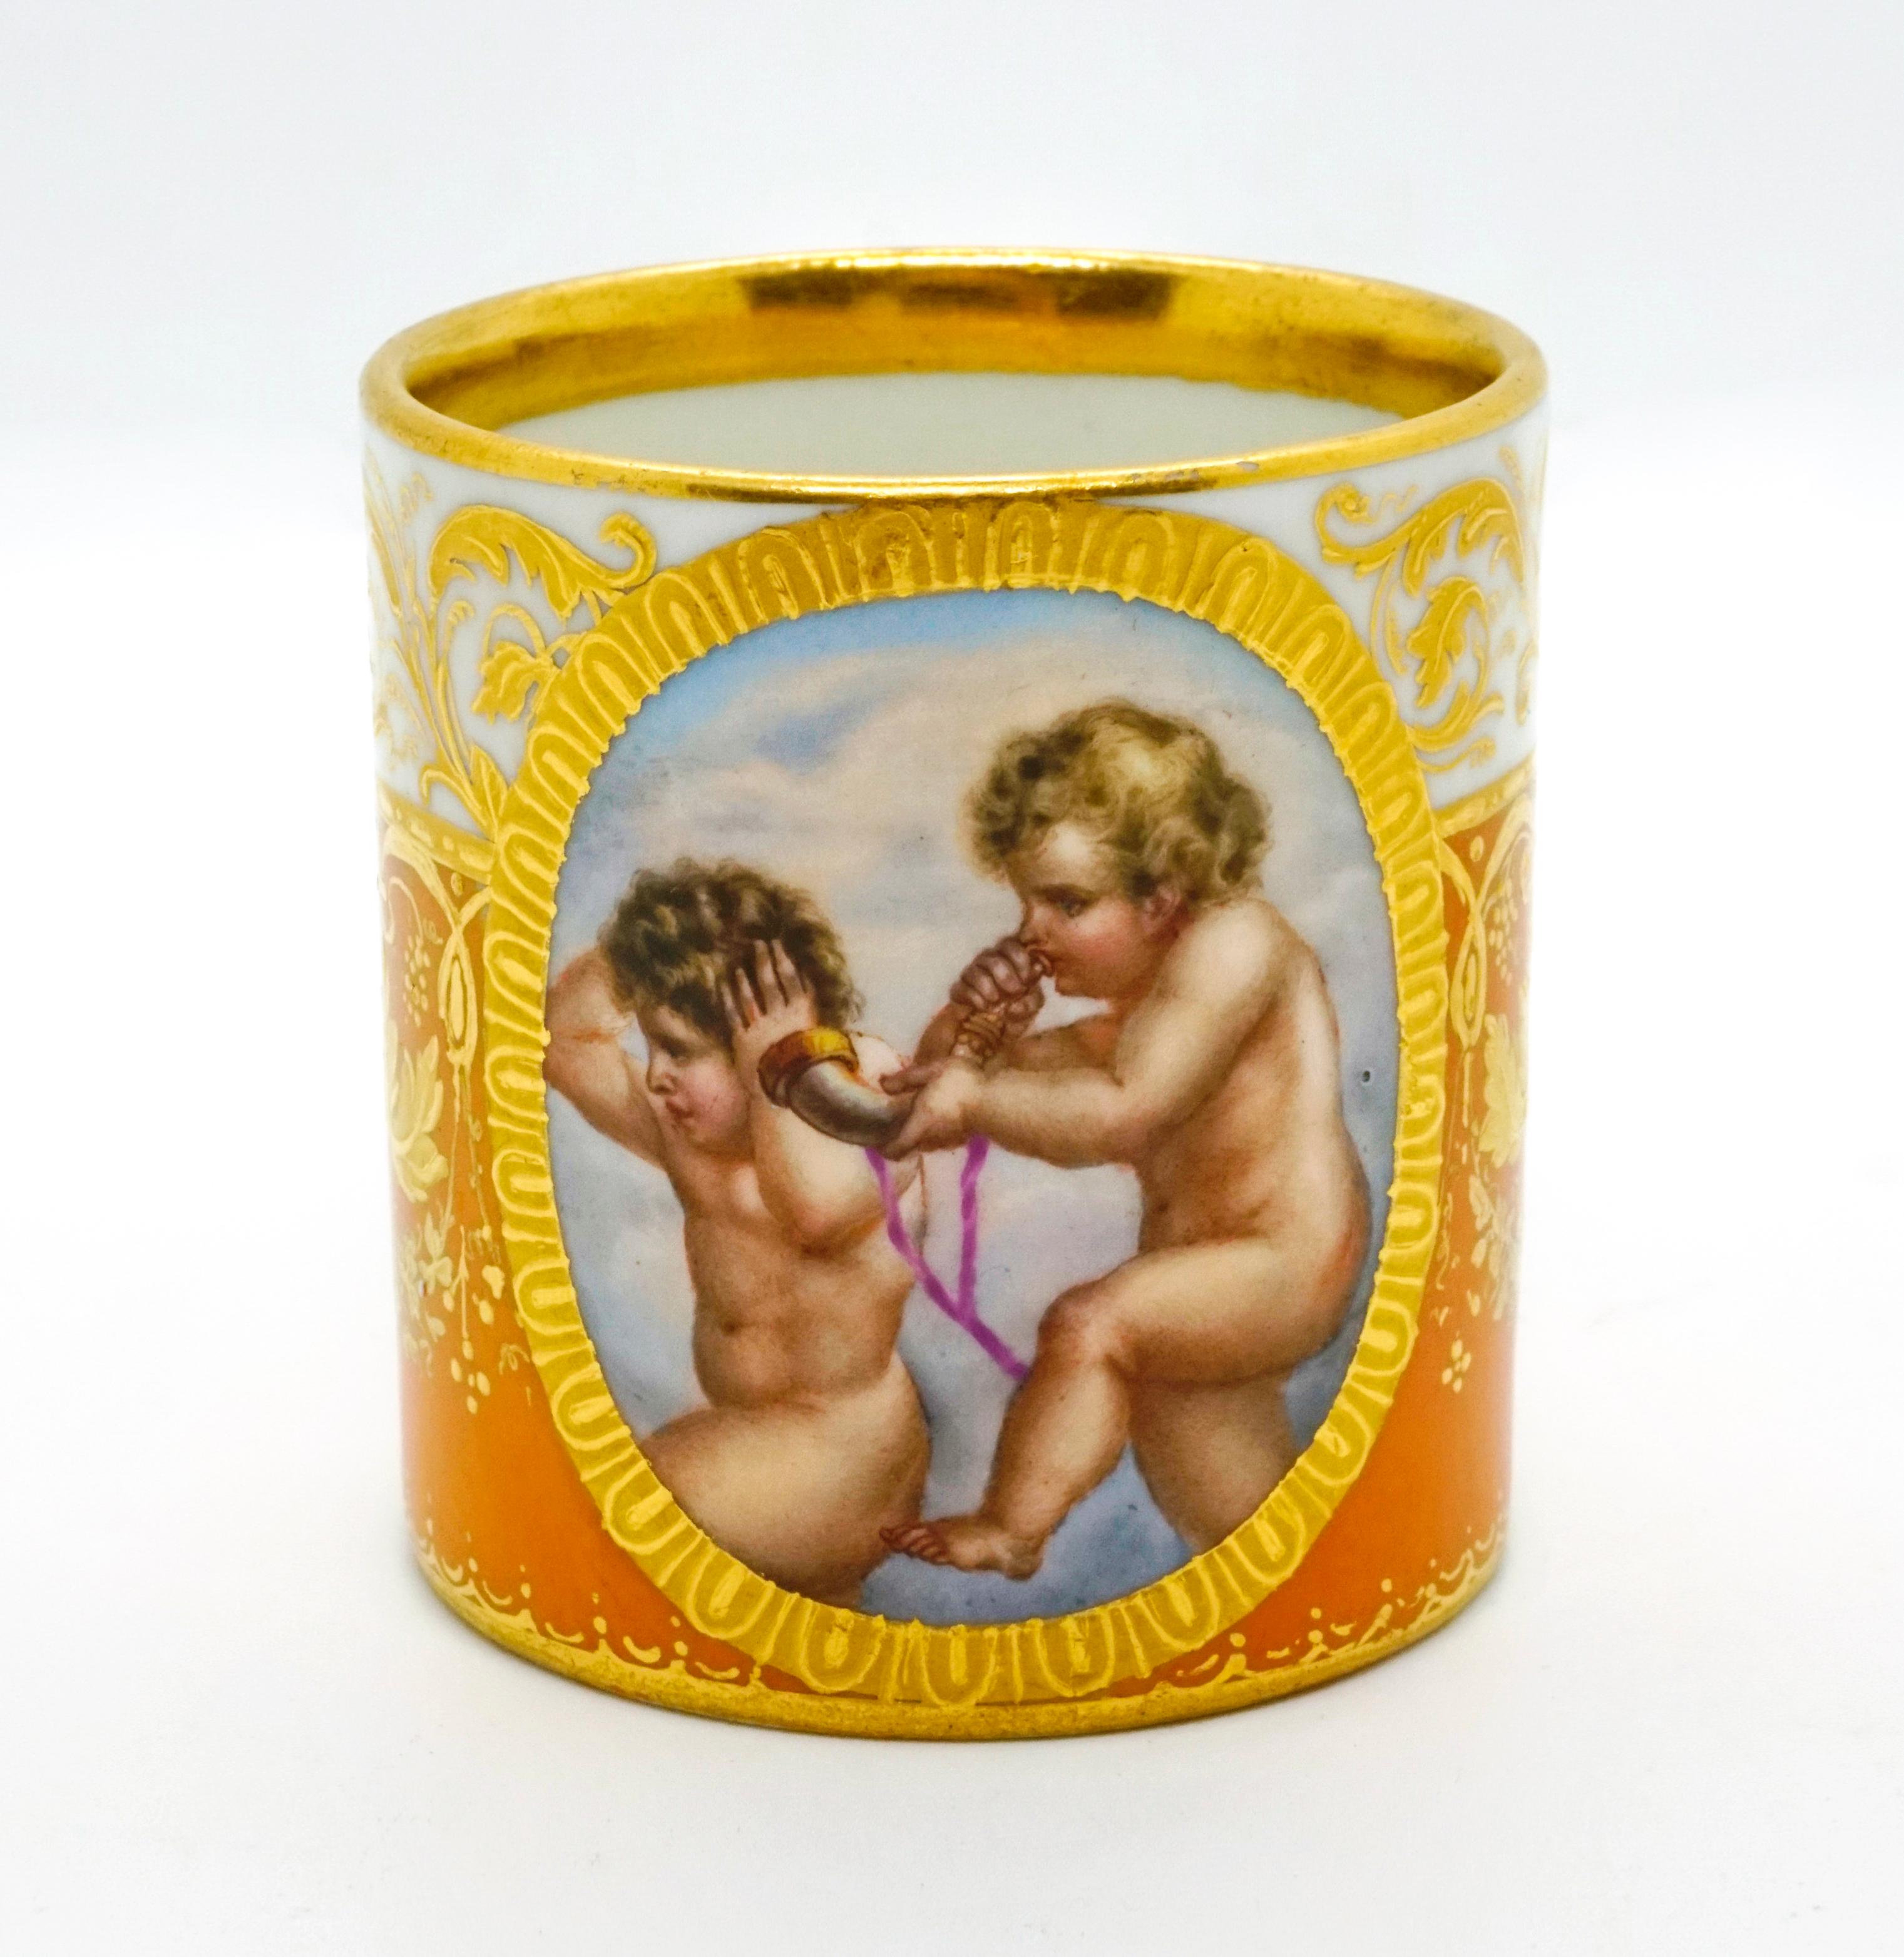 Austrian Viennese Imperial Porcelain Collecting Cup Yellow and Gold with Cupids, 1825